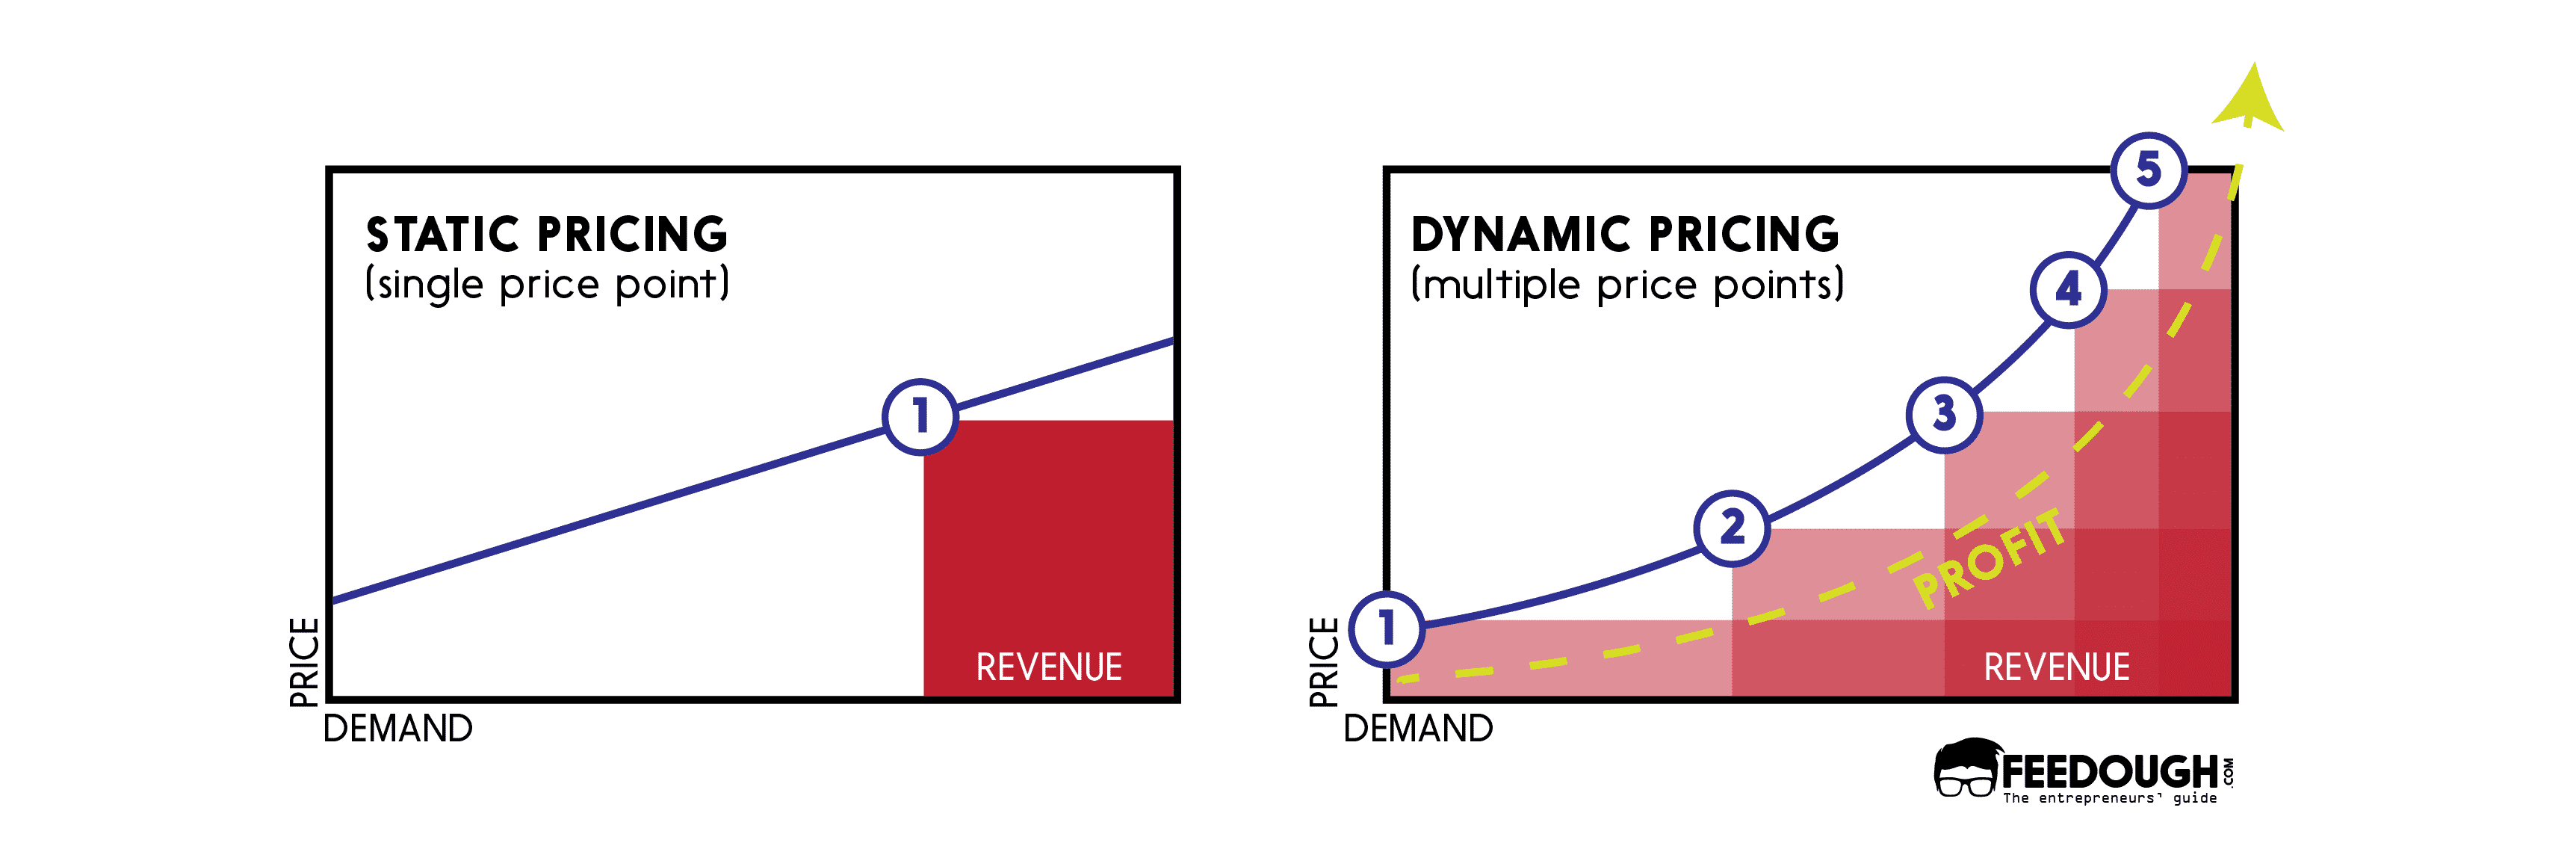 dynamic pricing graph